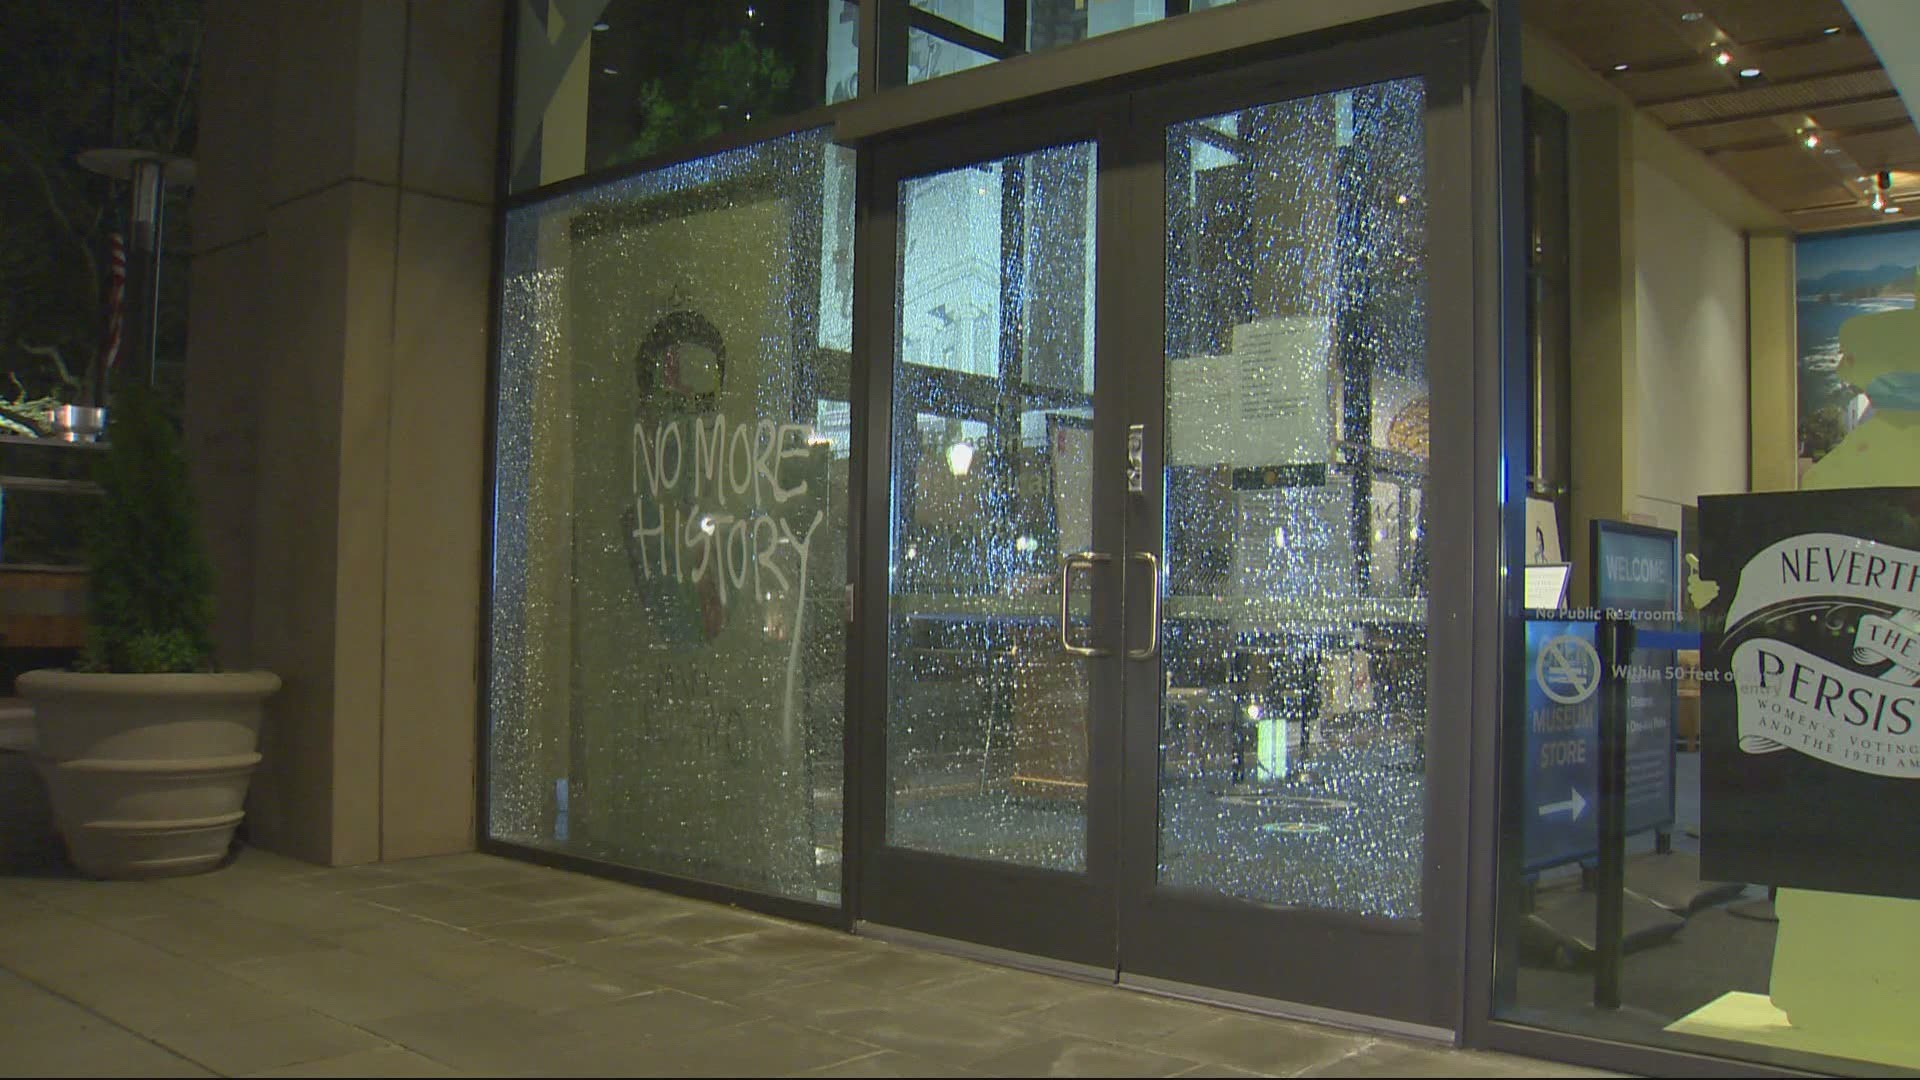 Police declared a riot in downtown Portland on Friday night after people smashed windows of several businesses.